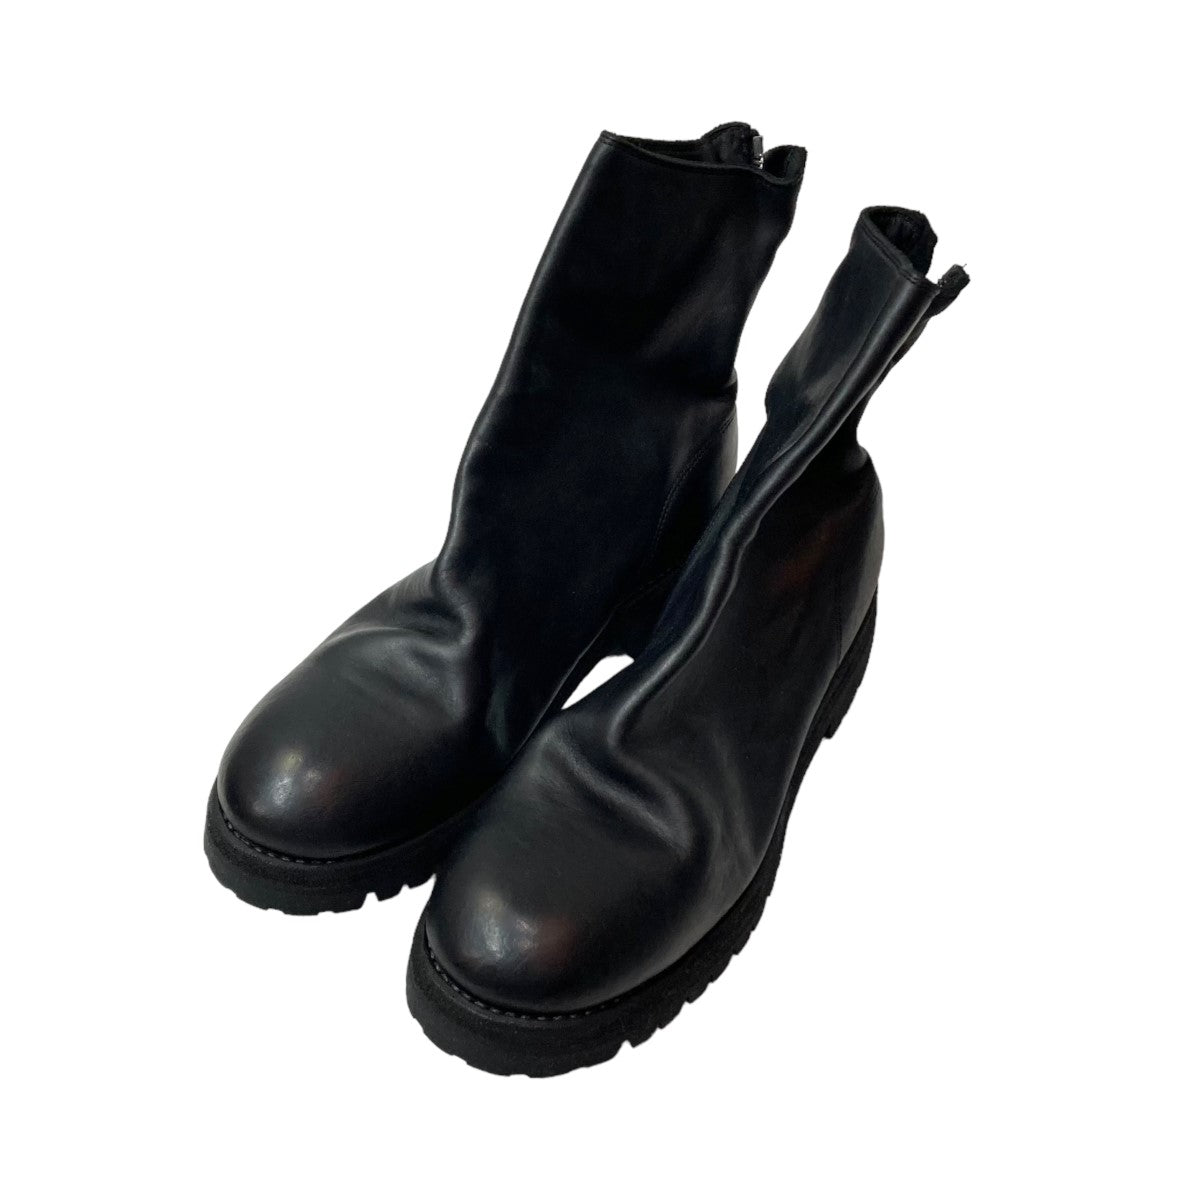 GUIDI(グイディ) BACK-ZIP BOOTS SOLE RUBBER バックジップブーツ 796V ...